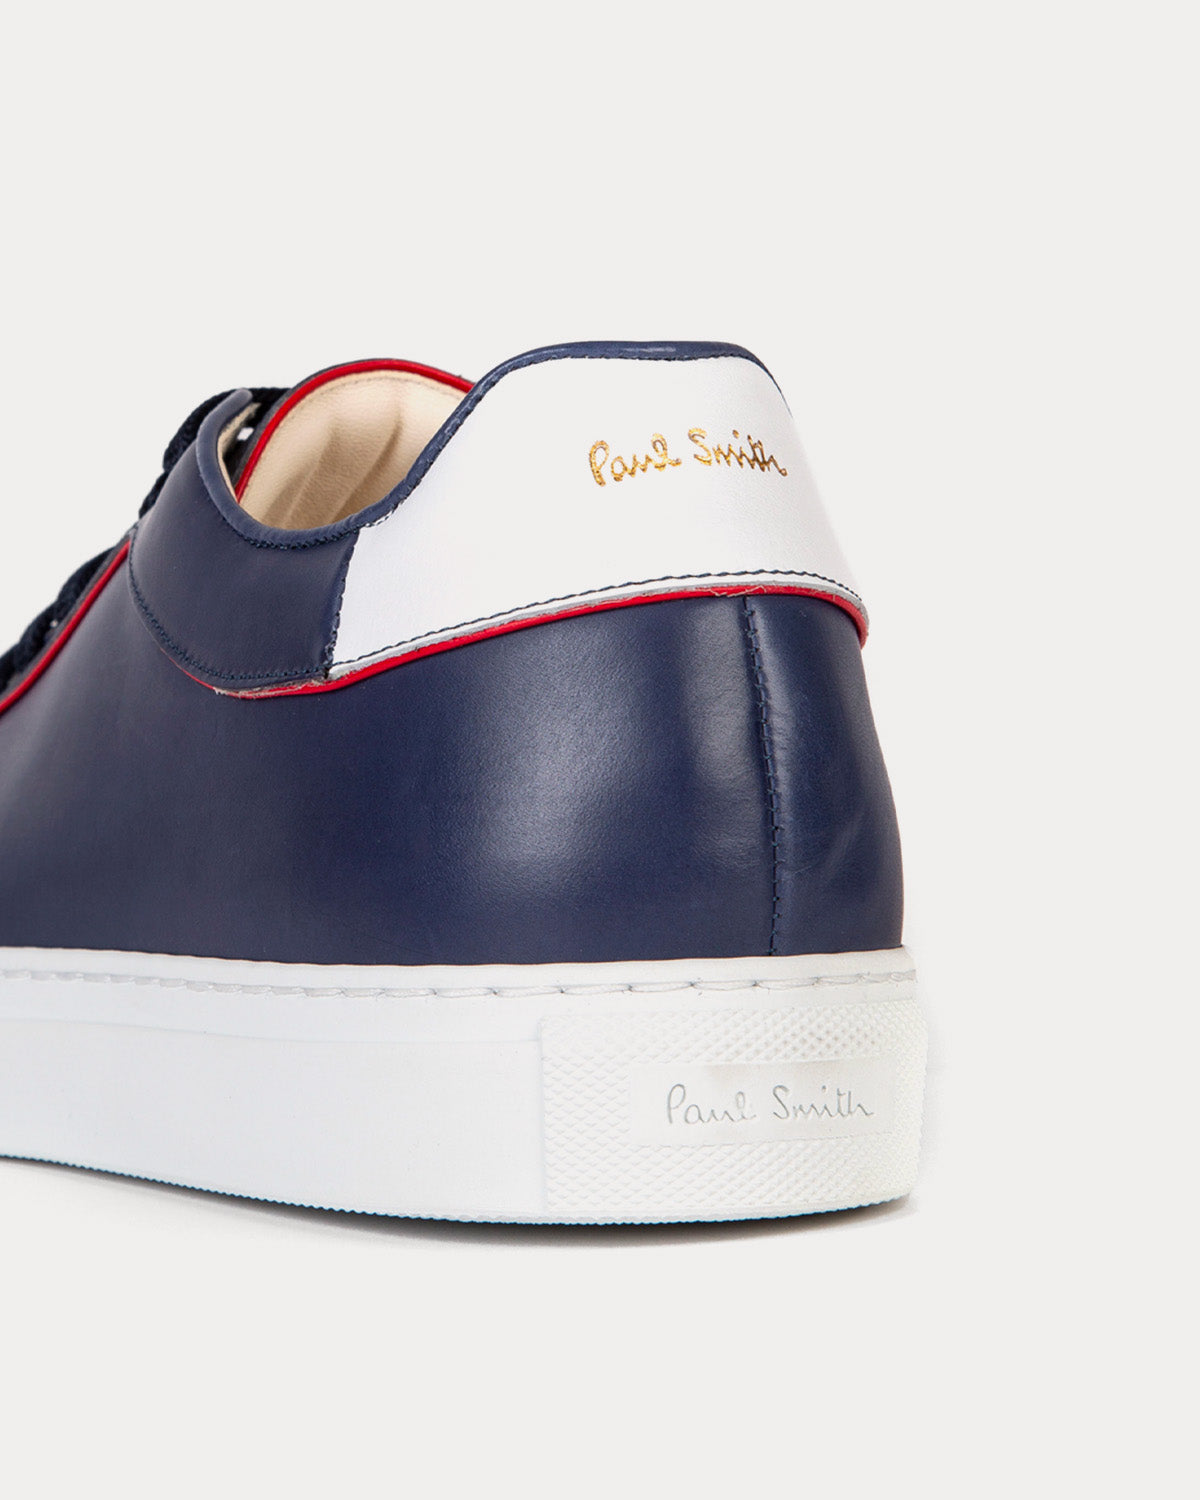 Paul Smith - Basso with Red Trim Navy Low Top Sneakers